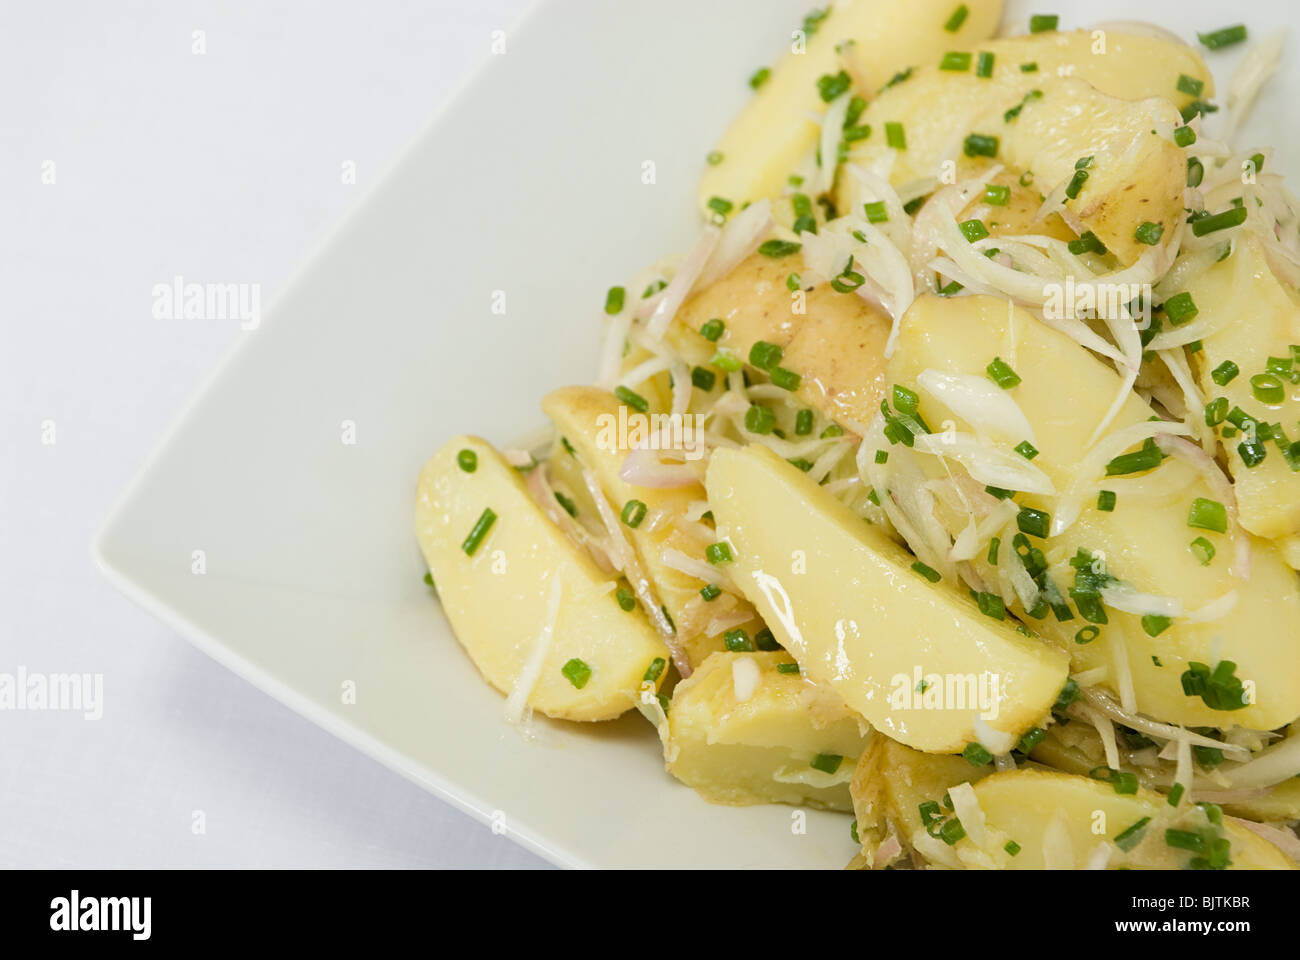 Potatoes with onions and chives Stock Photo